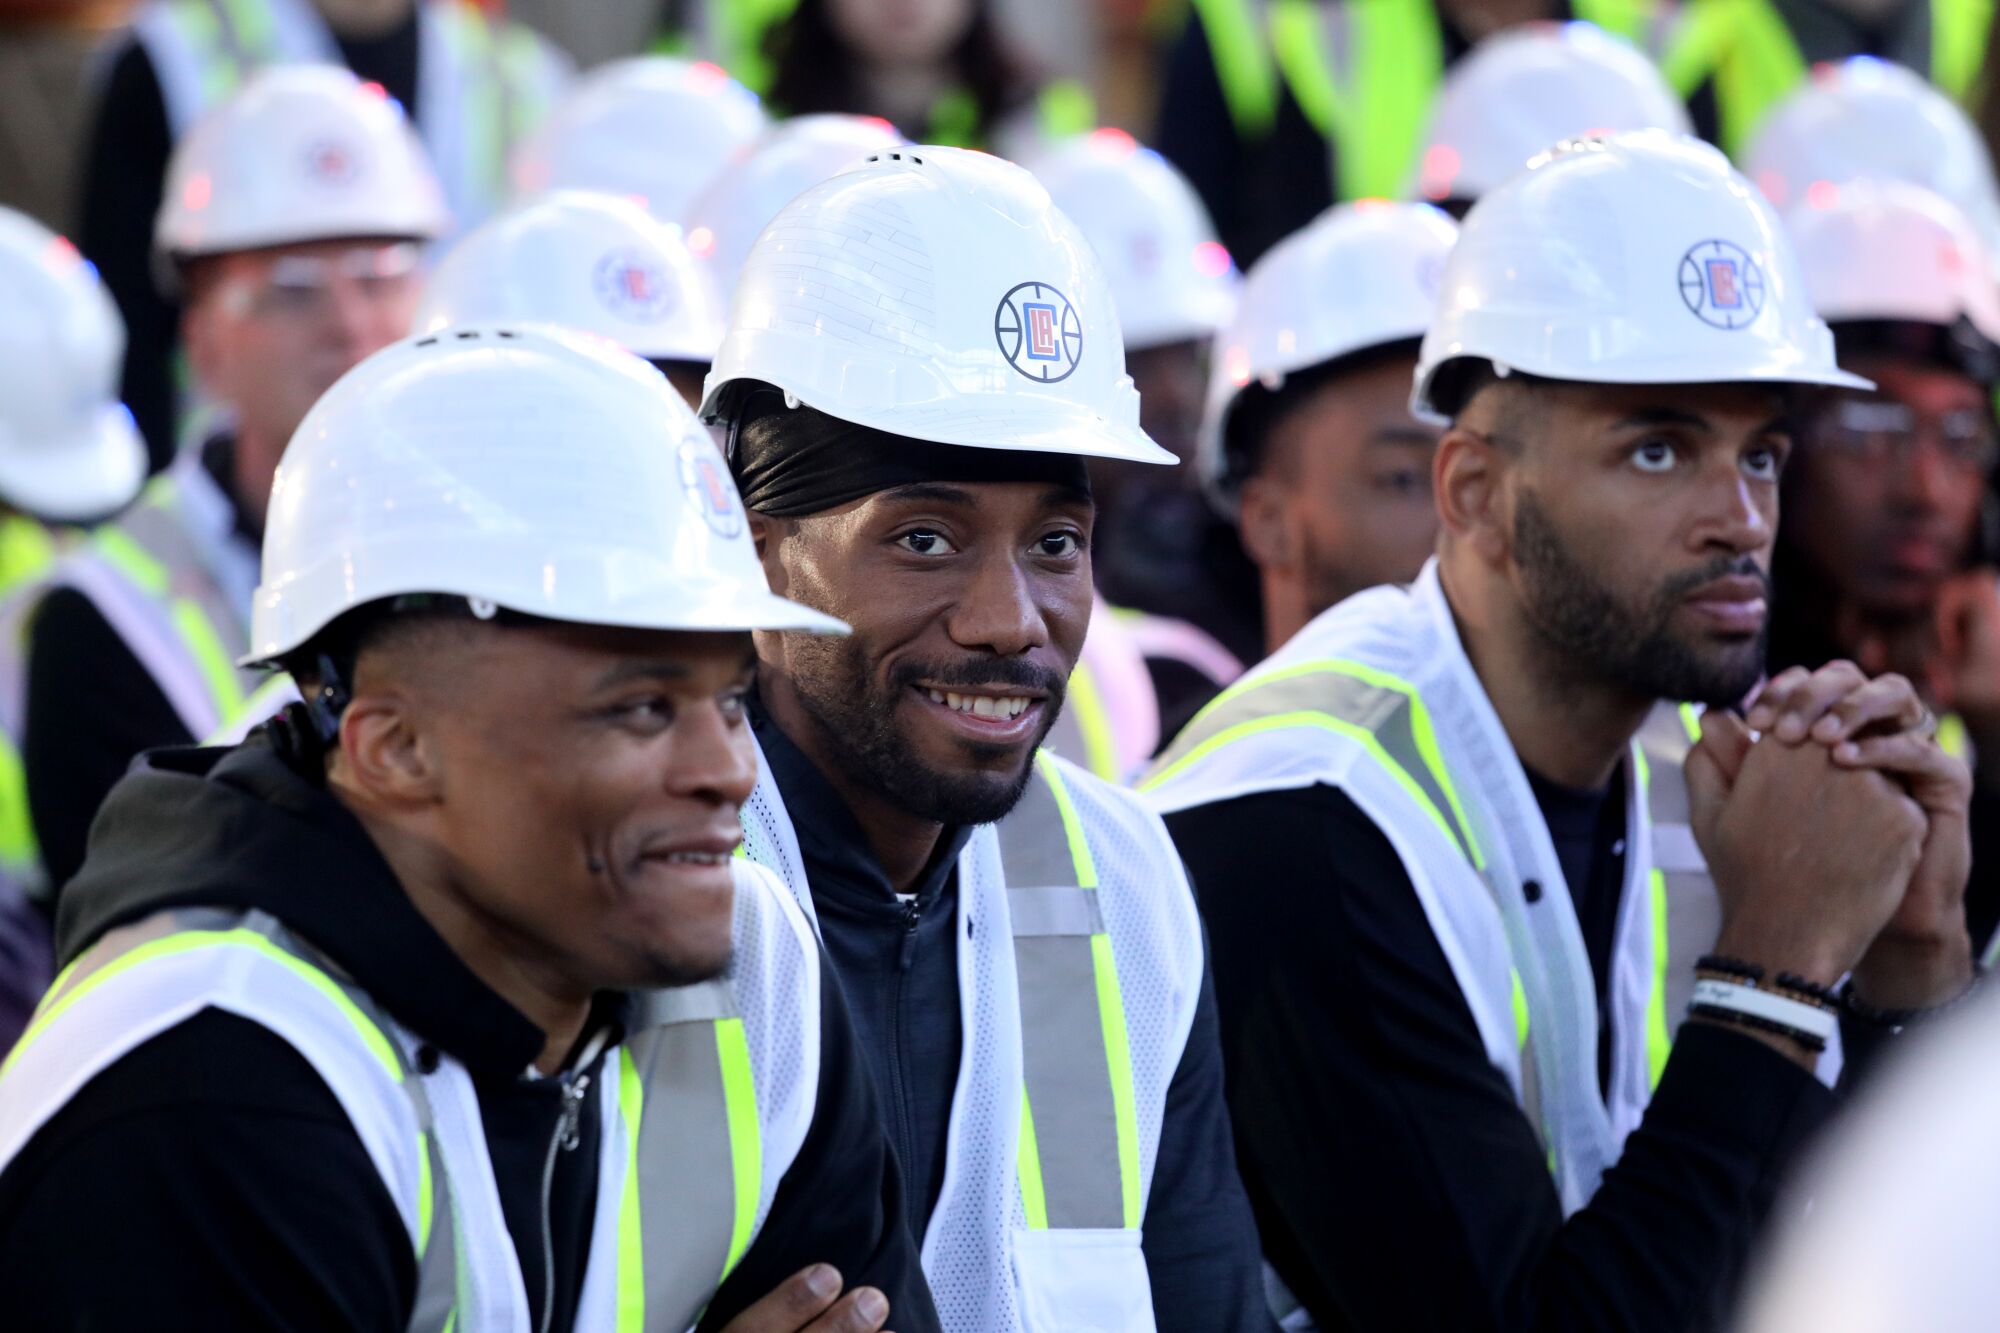 Russell Westbrook and Kawhi Leonard are all smiles as they watch from their seats during a ceremony at the Intuit Dome.